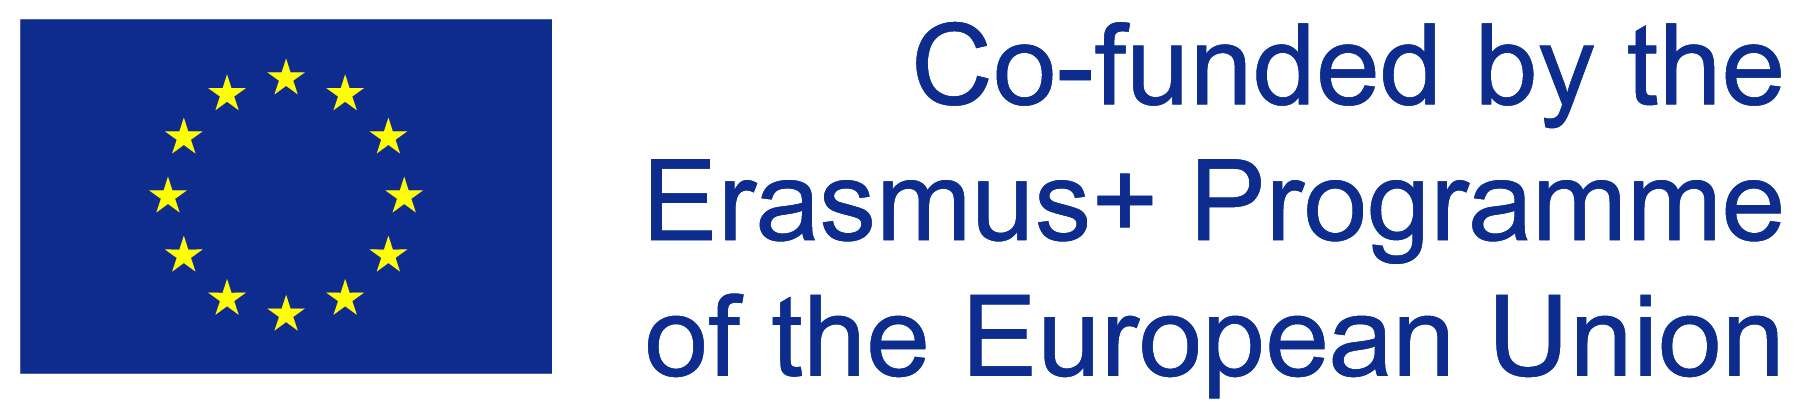 Co-funded by the Erasmus+ Program of the European Union